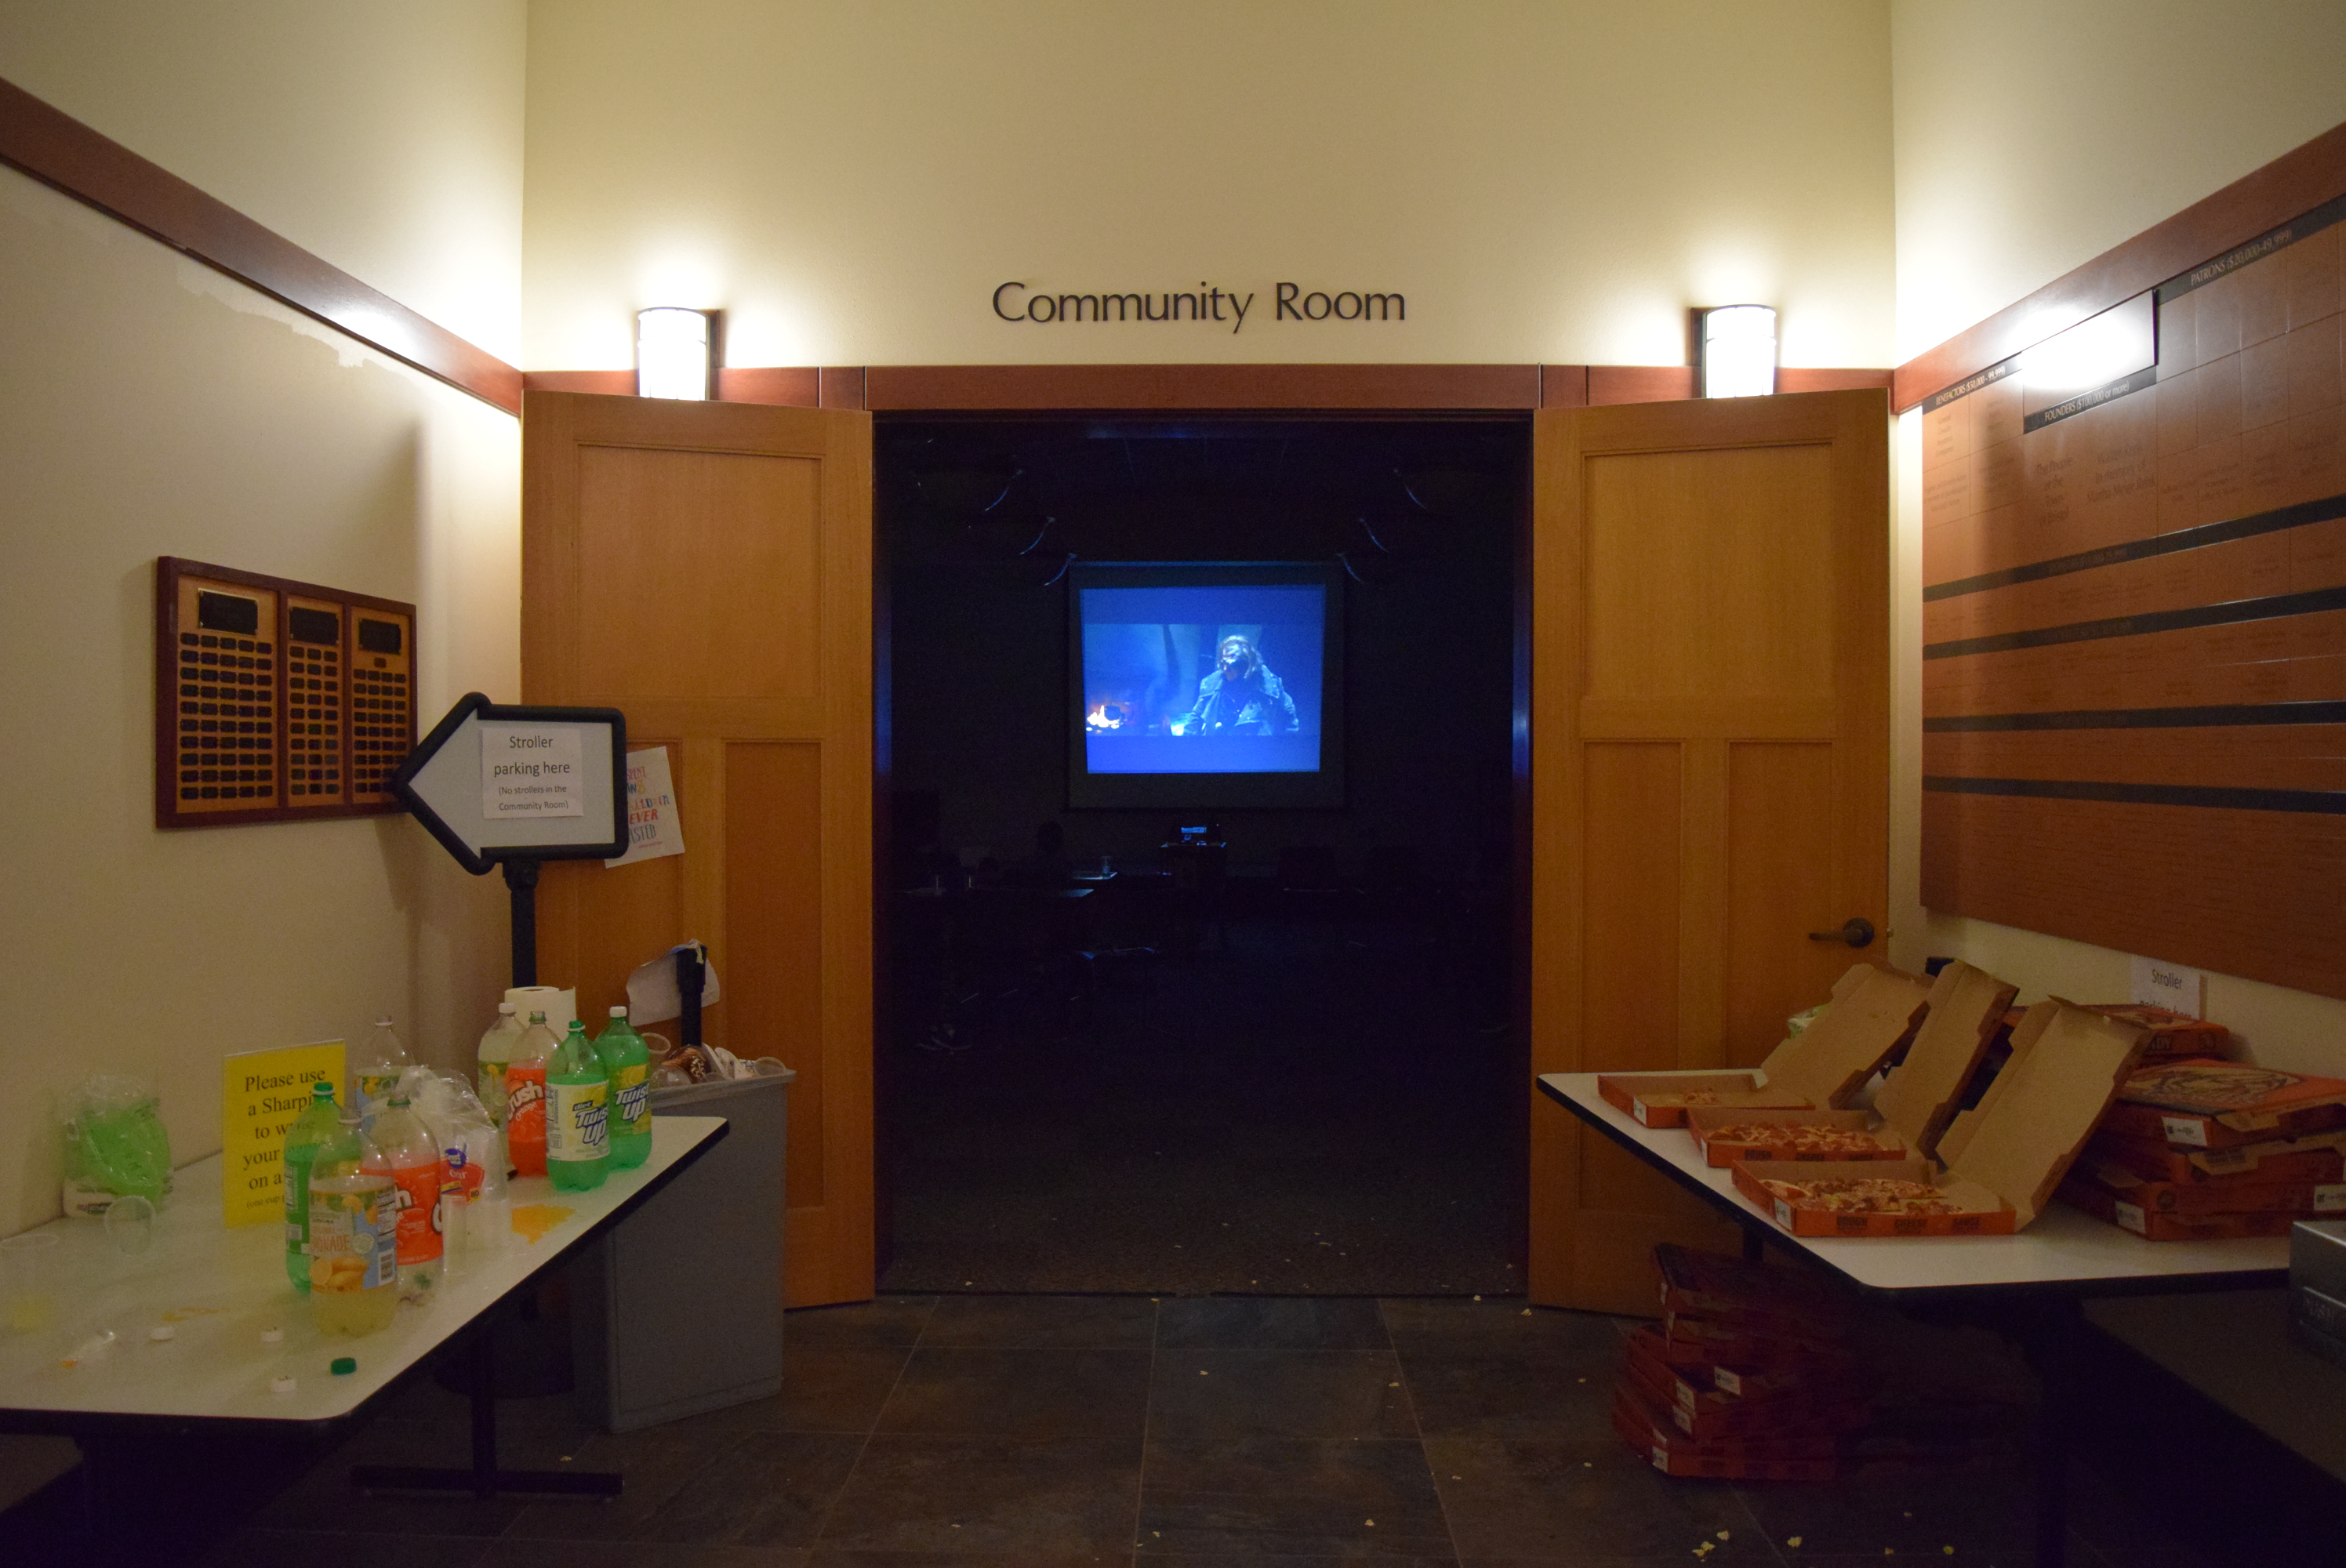 Library Community Room entrance, surrounded by pizza and soda bottles.